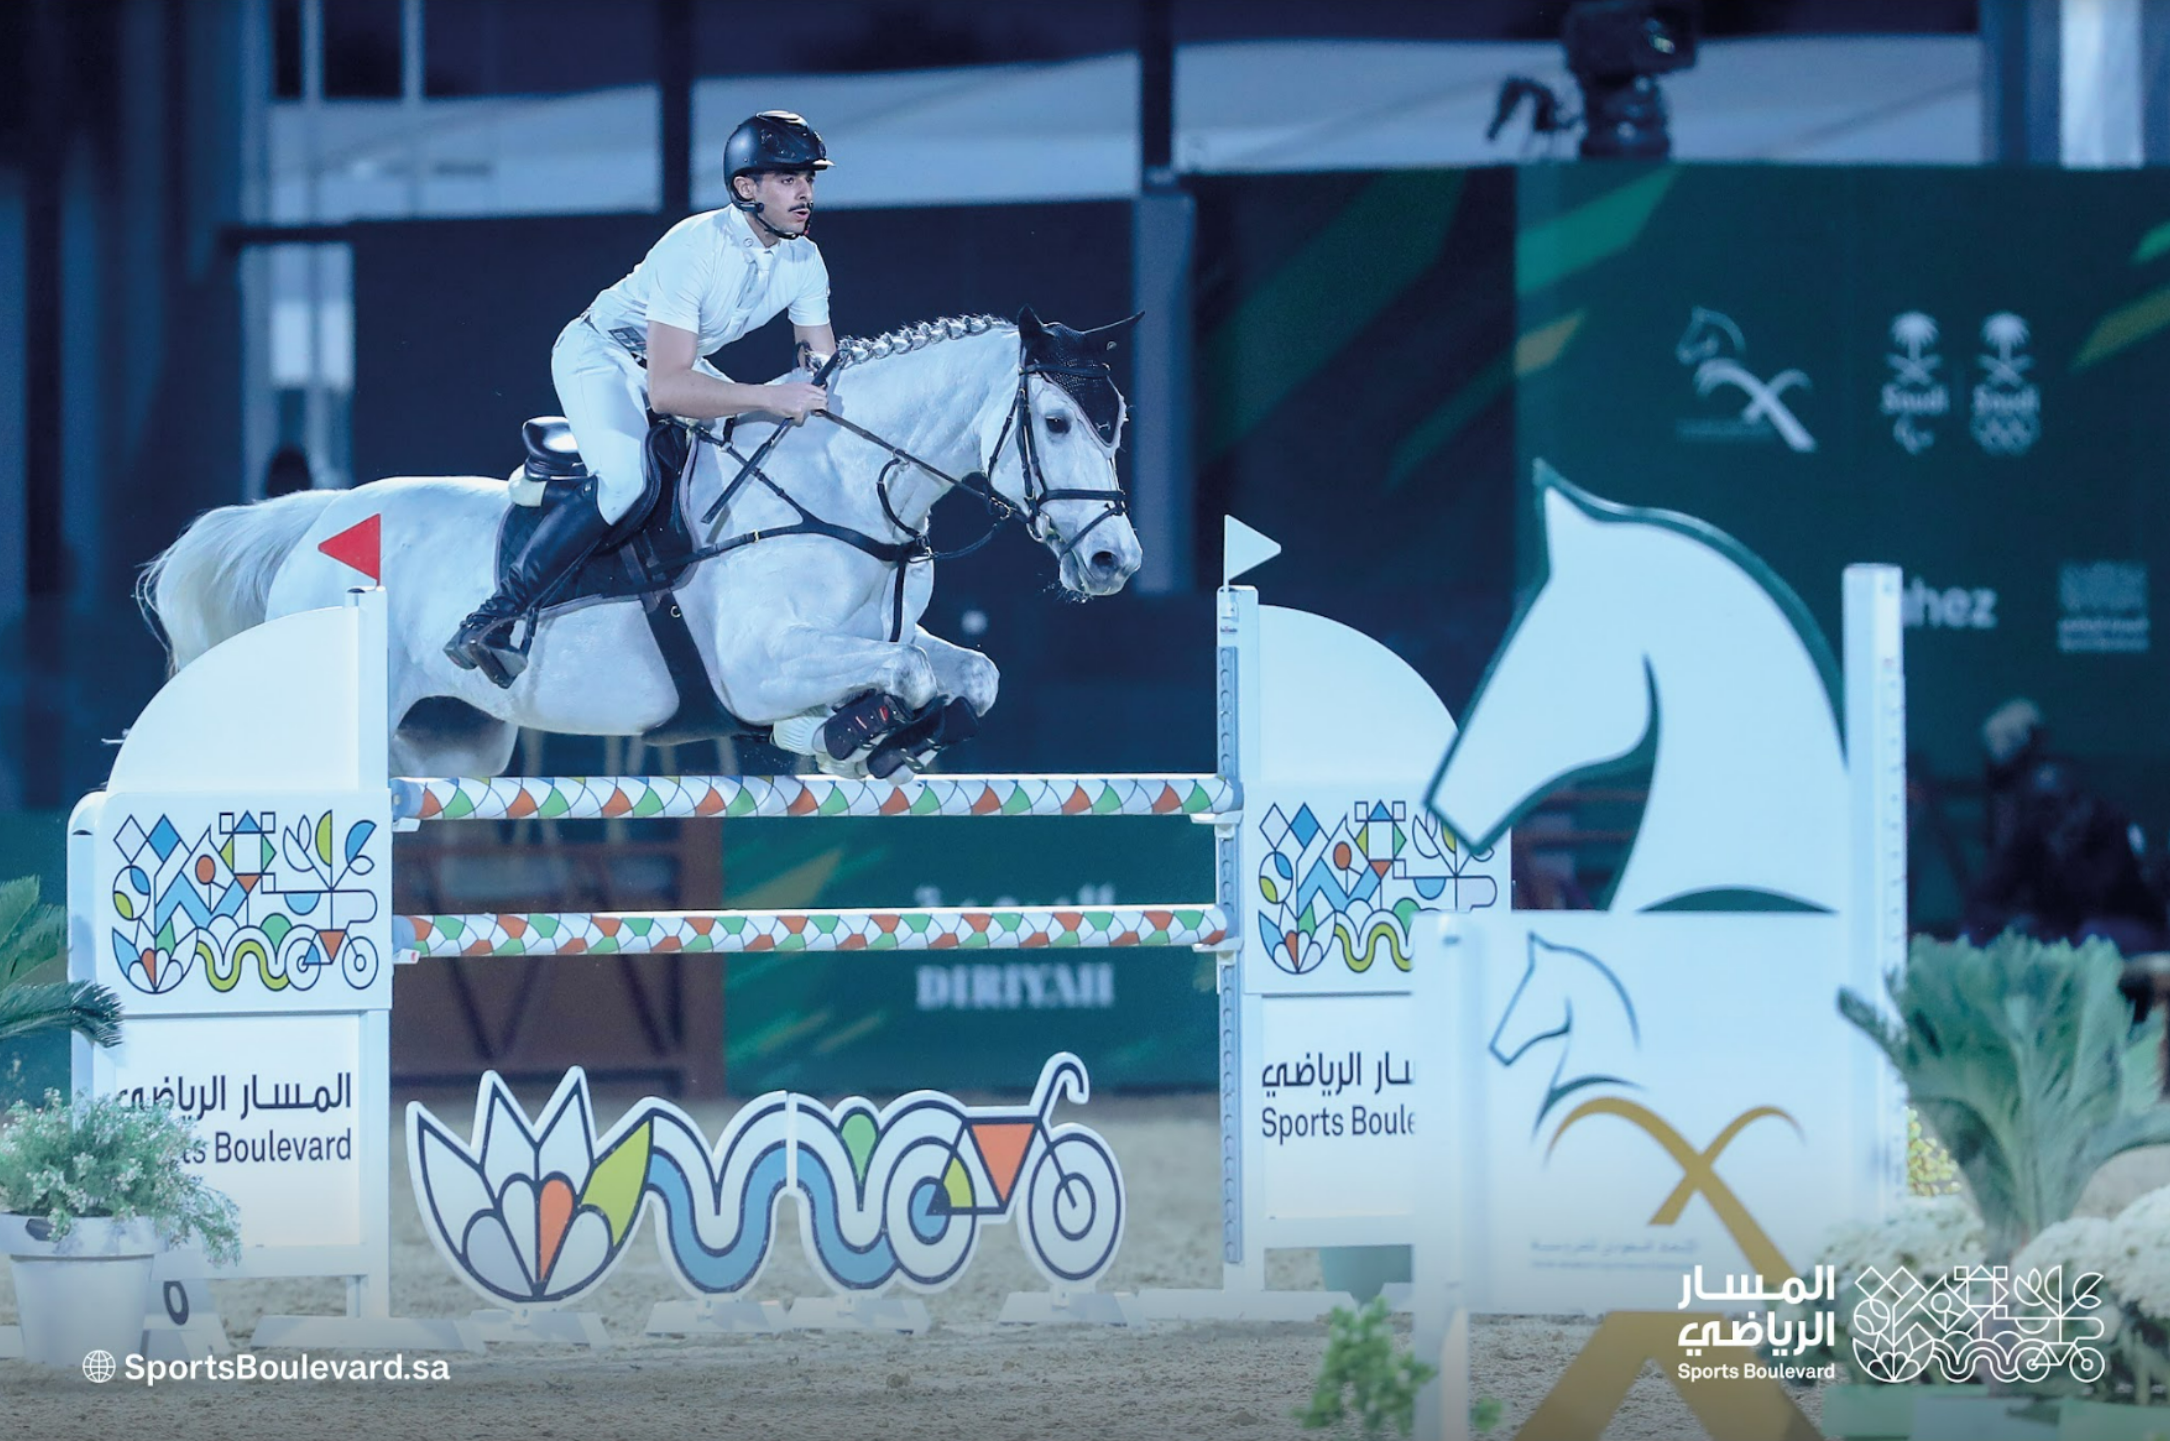 We're excited to be supporting the Saudi Olympic & Paralympic Committee Cup Show Jumping Championship. An event we hope will inspire a new generation of equestrians across Riyadh and beyond! 🏇🏻
 
#Sports_Boulevard
#ChampionsAmongUs